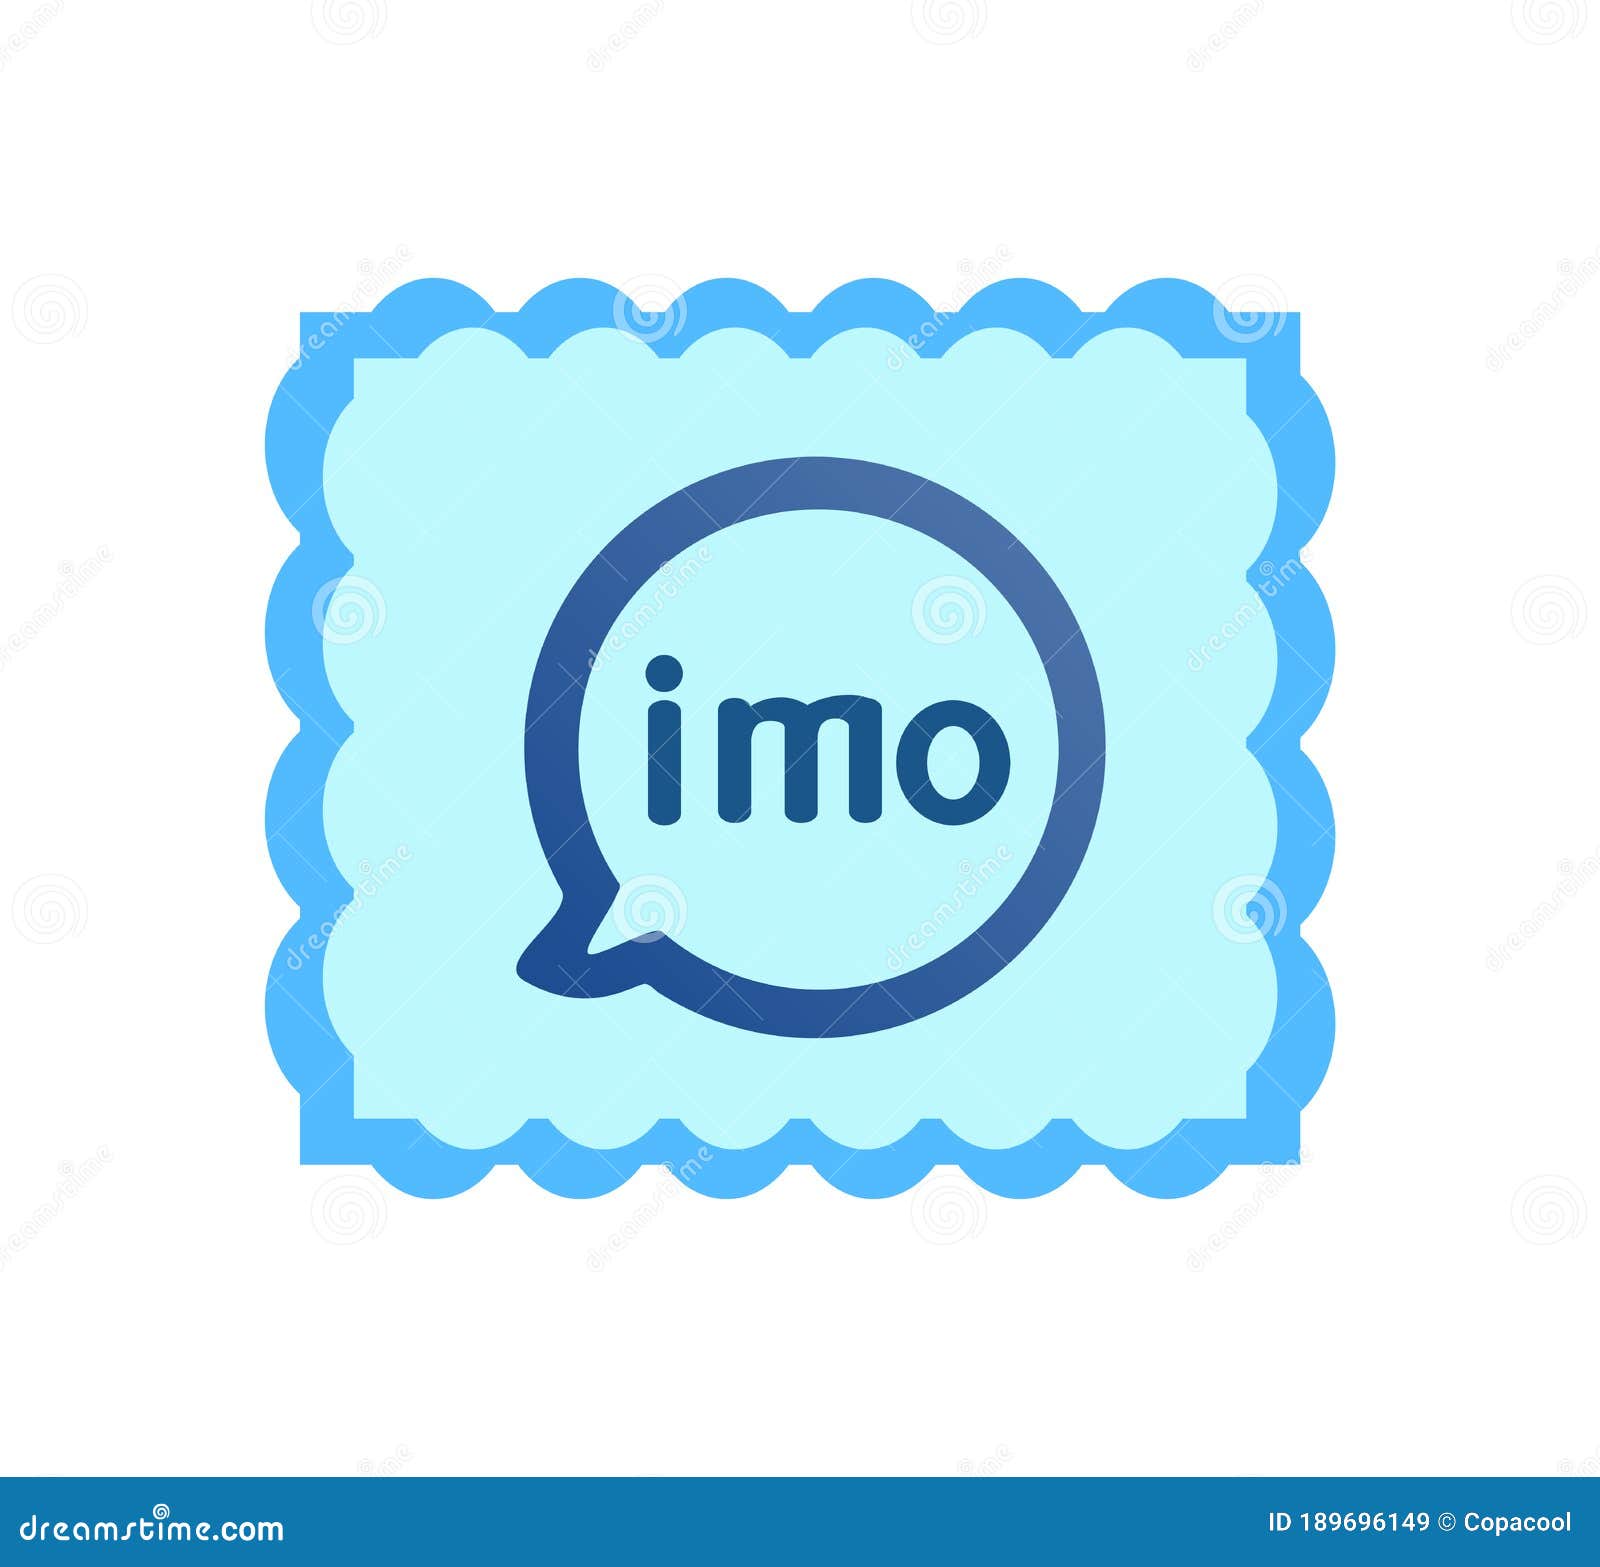 Imo free video calls and chat